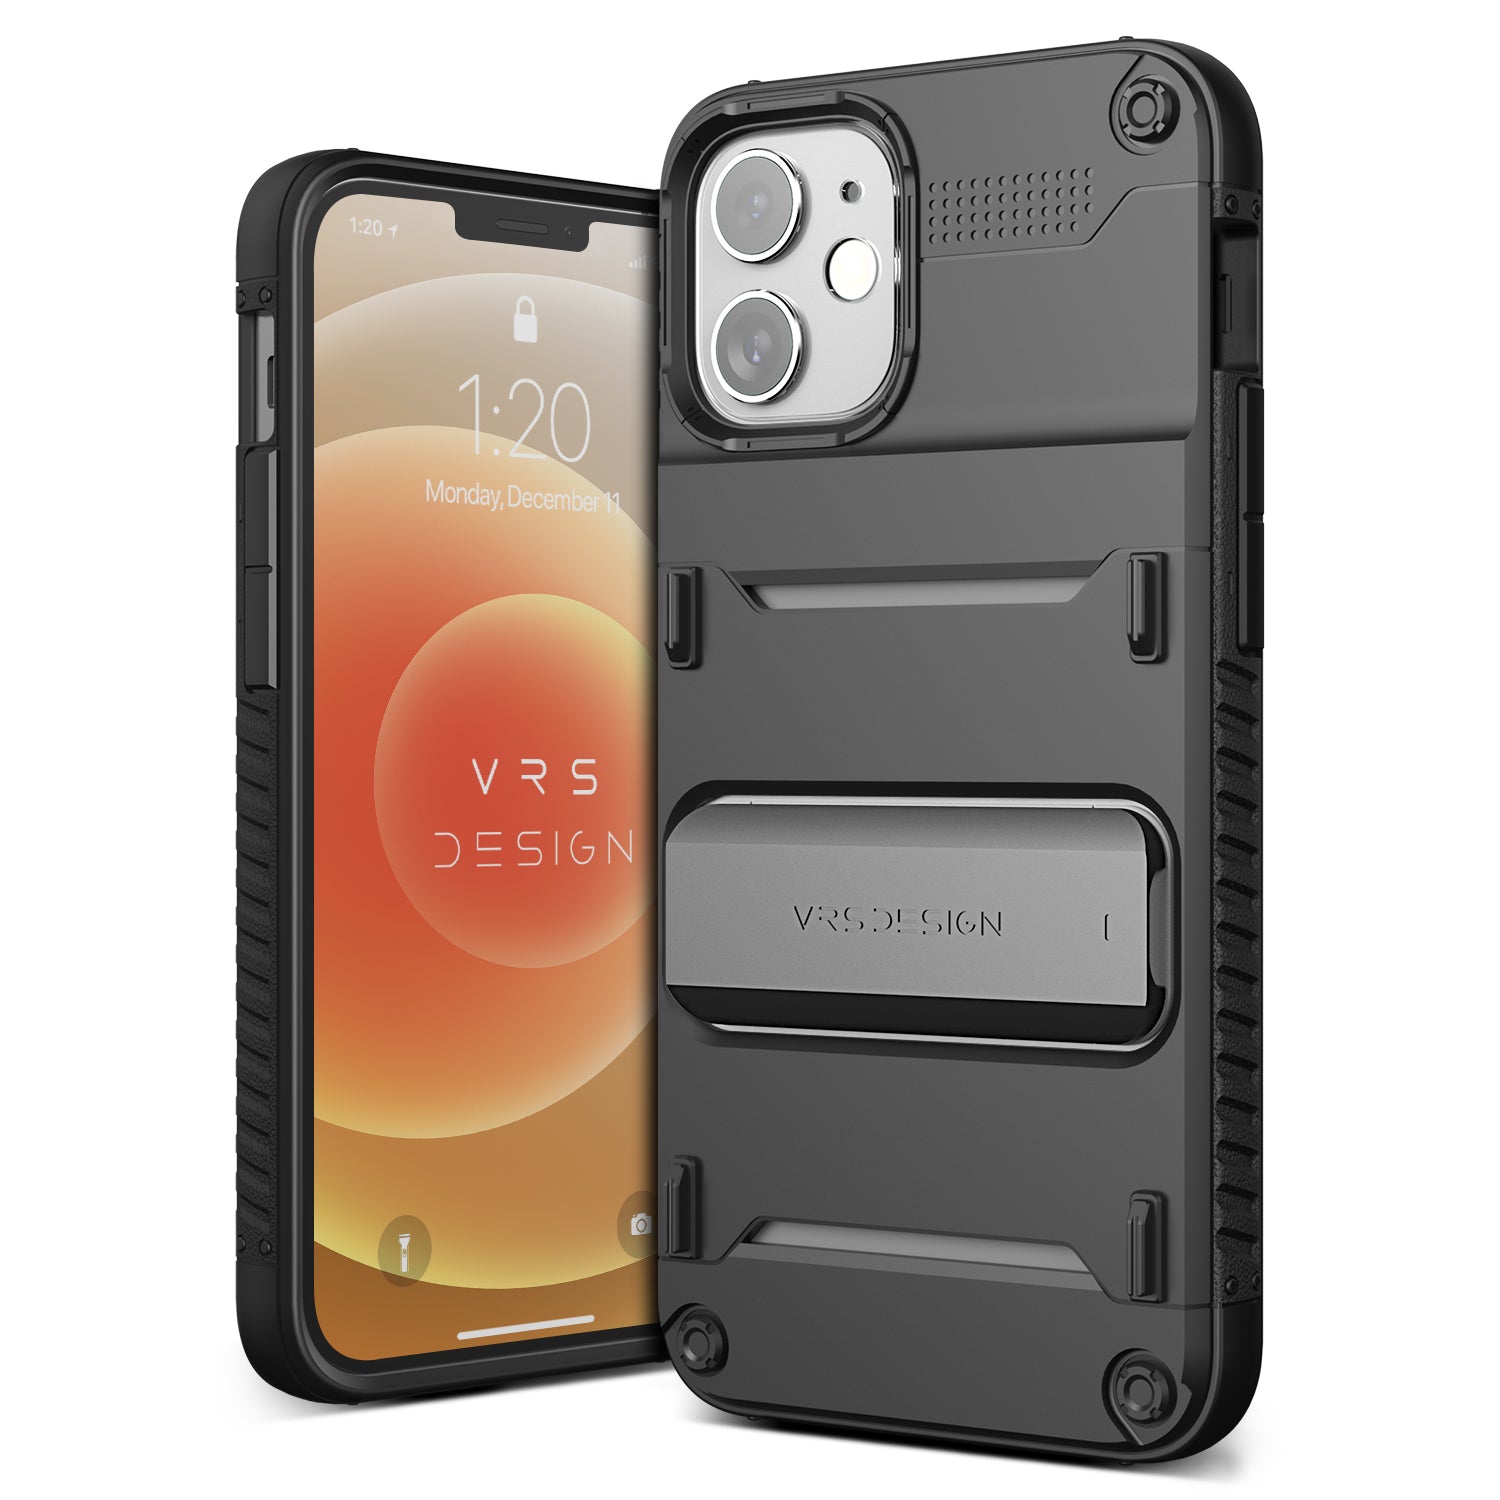 Apple 12 mini rugged Glide wallet case with multiple durable and convenient card slot with sleek minimalist look by VRS